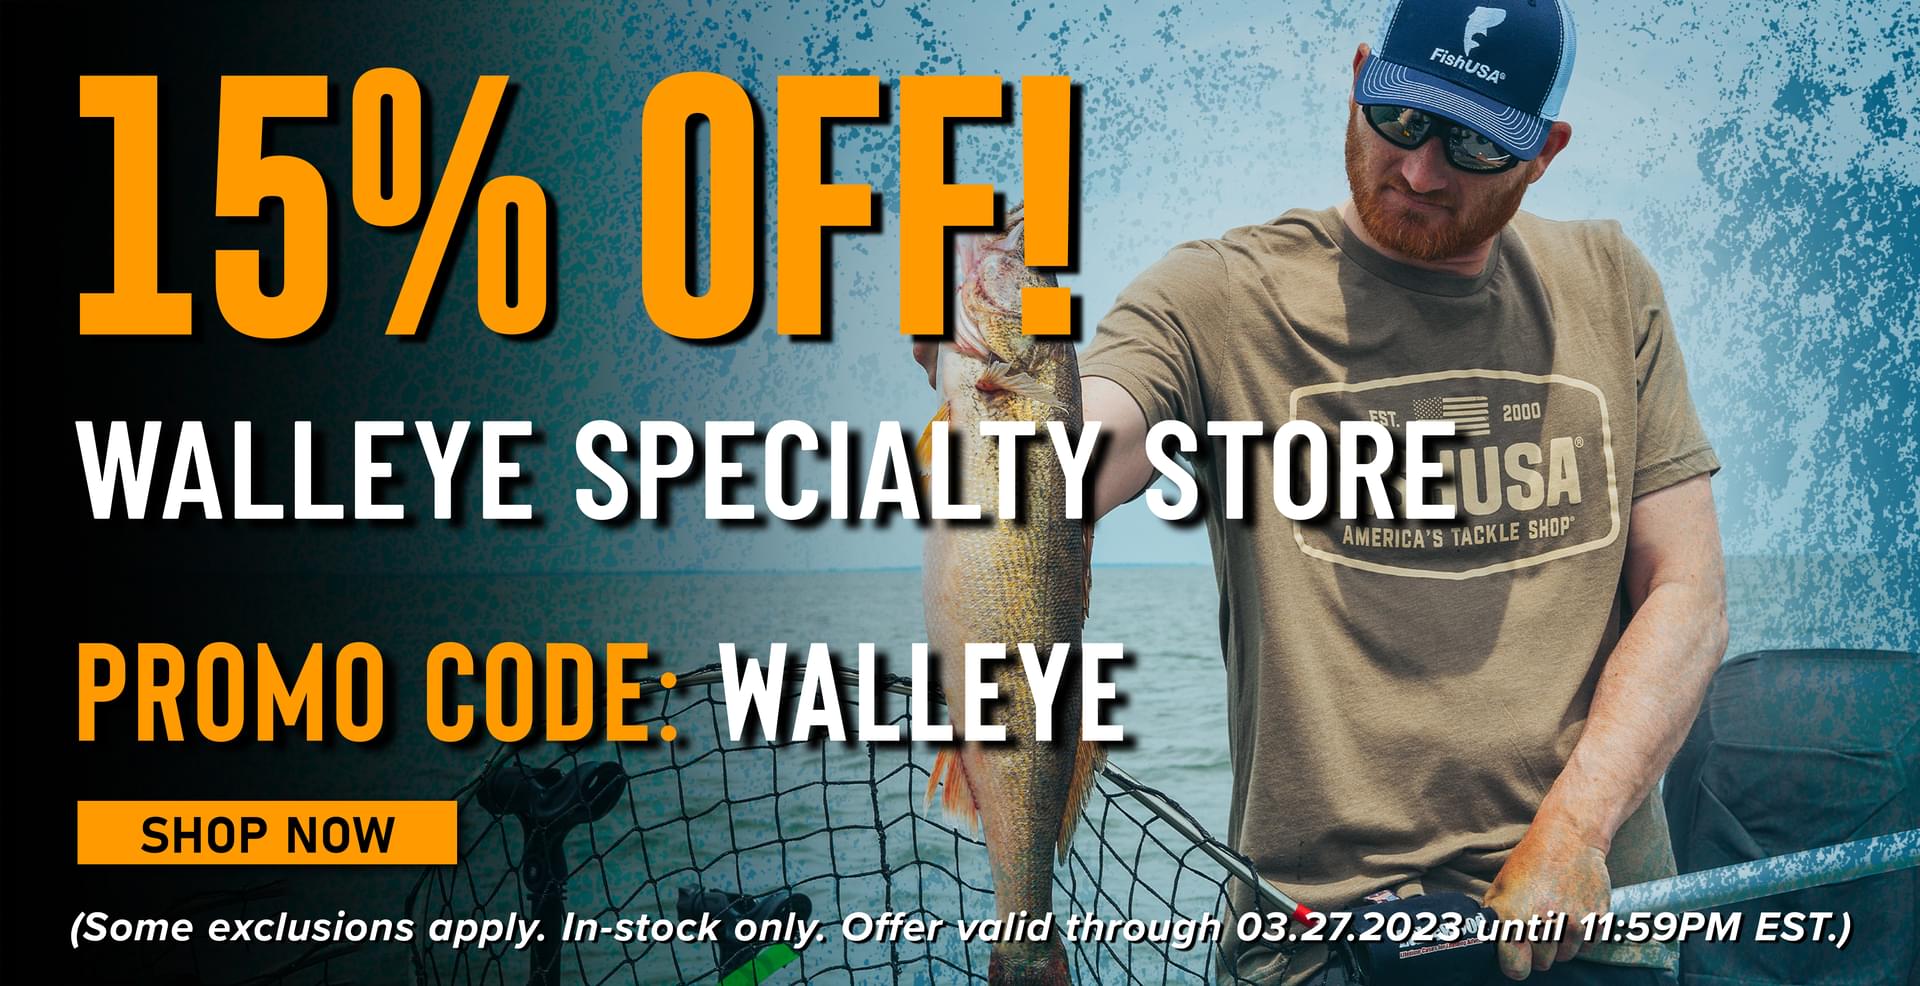 15% Off! Walleye Specialty Store Promo Code: WALLEYE Shop Now (Some exclusions apply. In-stock only. Offer valid through 03.27.2023 until 11:59PM EST.) WALLEY A e 0 % .I- 54 X Y '-,,;' P Some exclusions apply. In-sto 